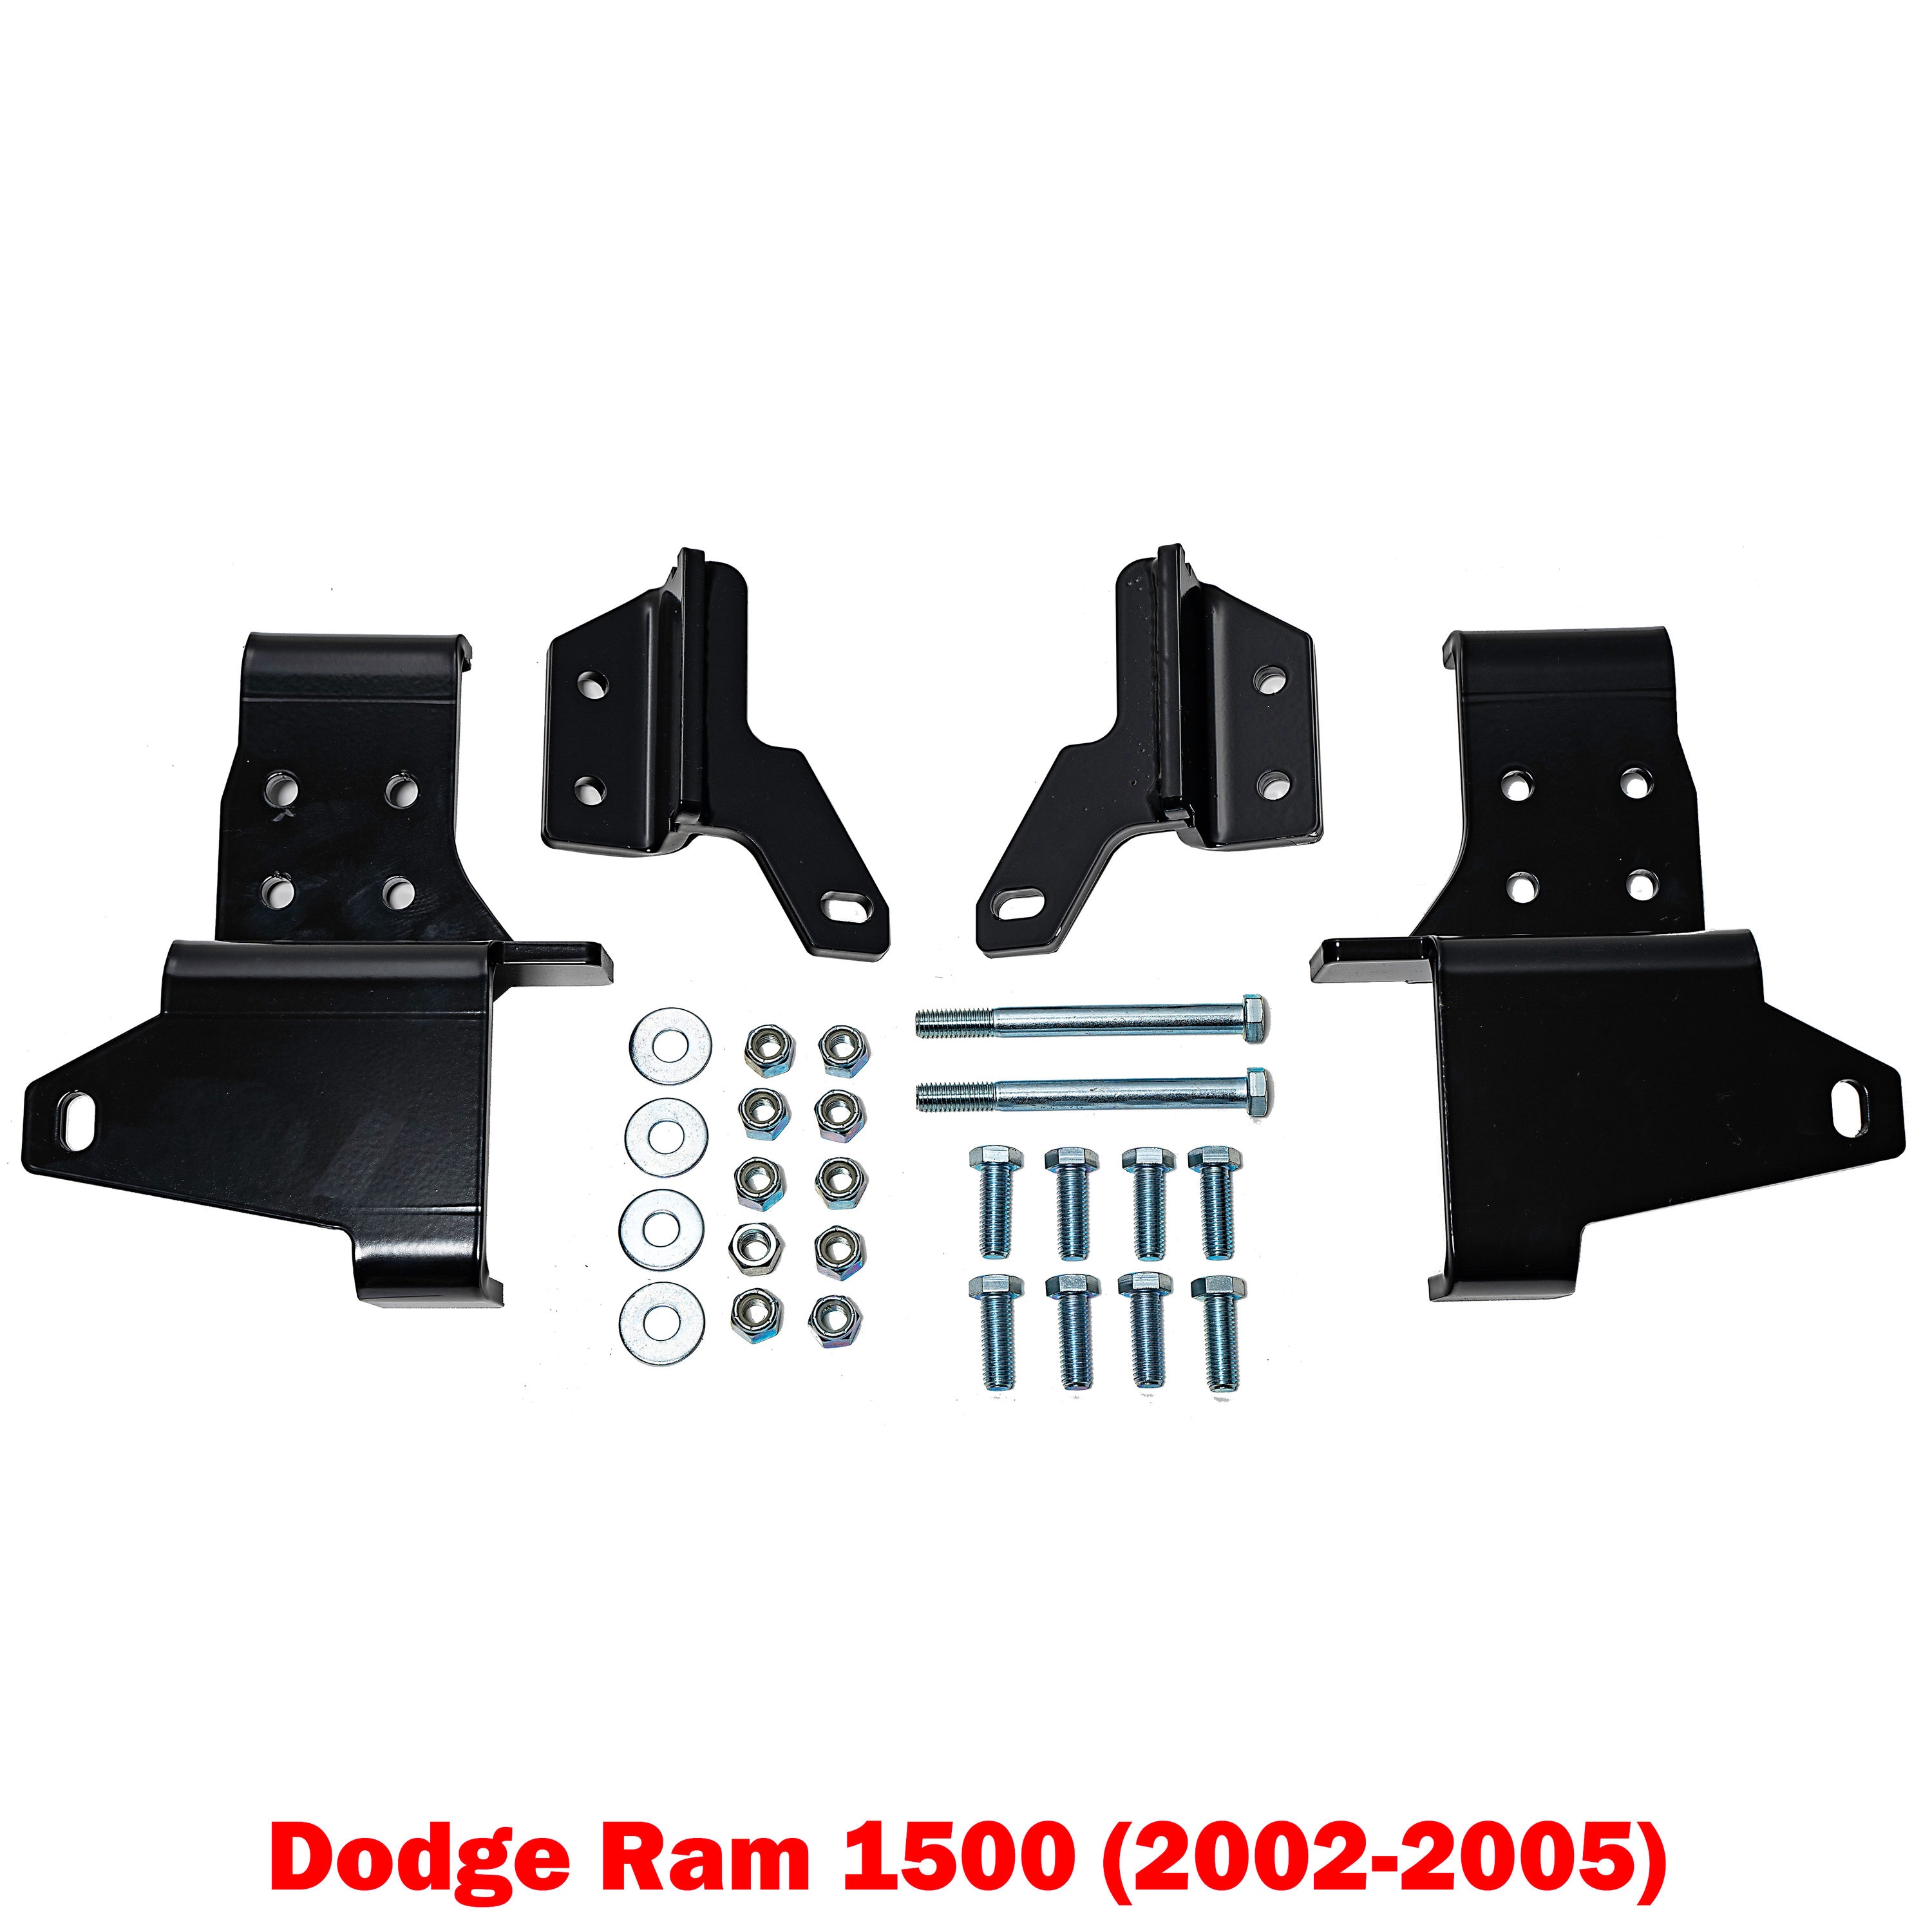 Detail K2 Mount Kit Snow Plow Accessory Compatible with Dodge Ram 1500 2002-2005 | 84311